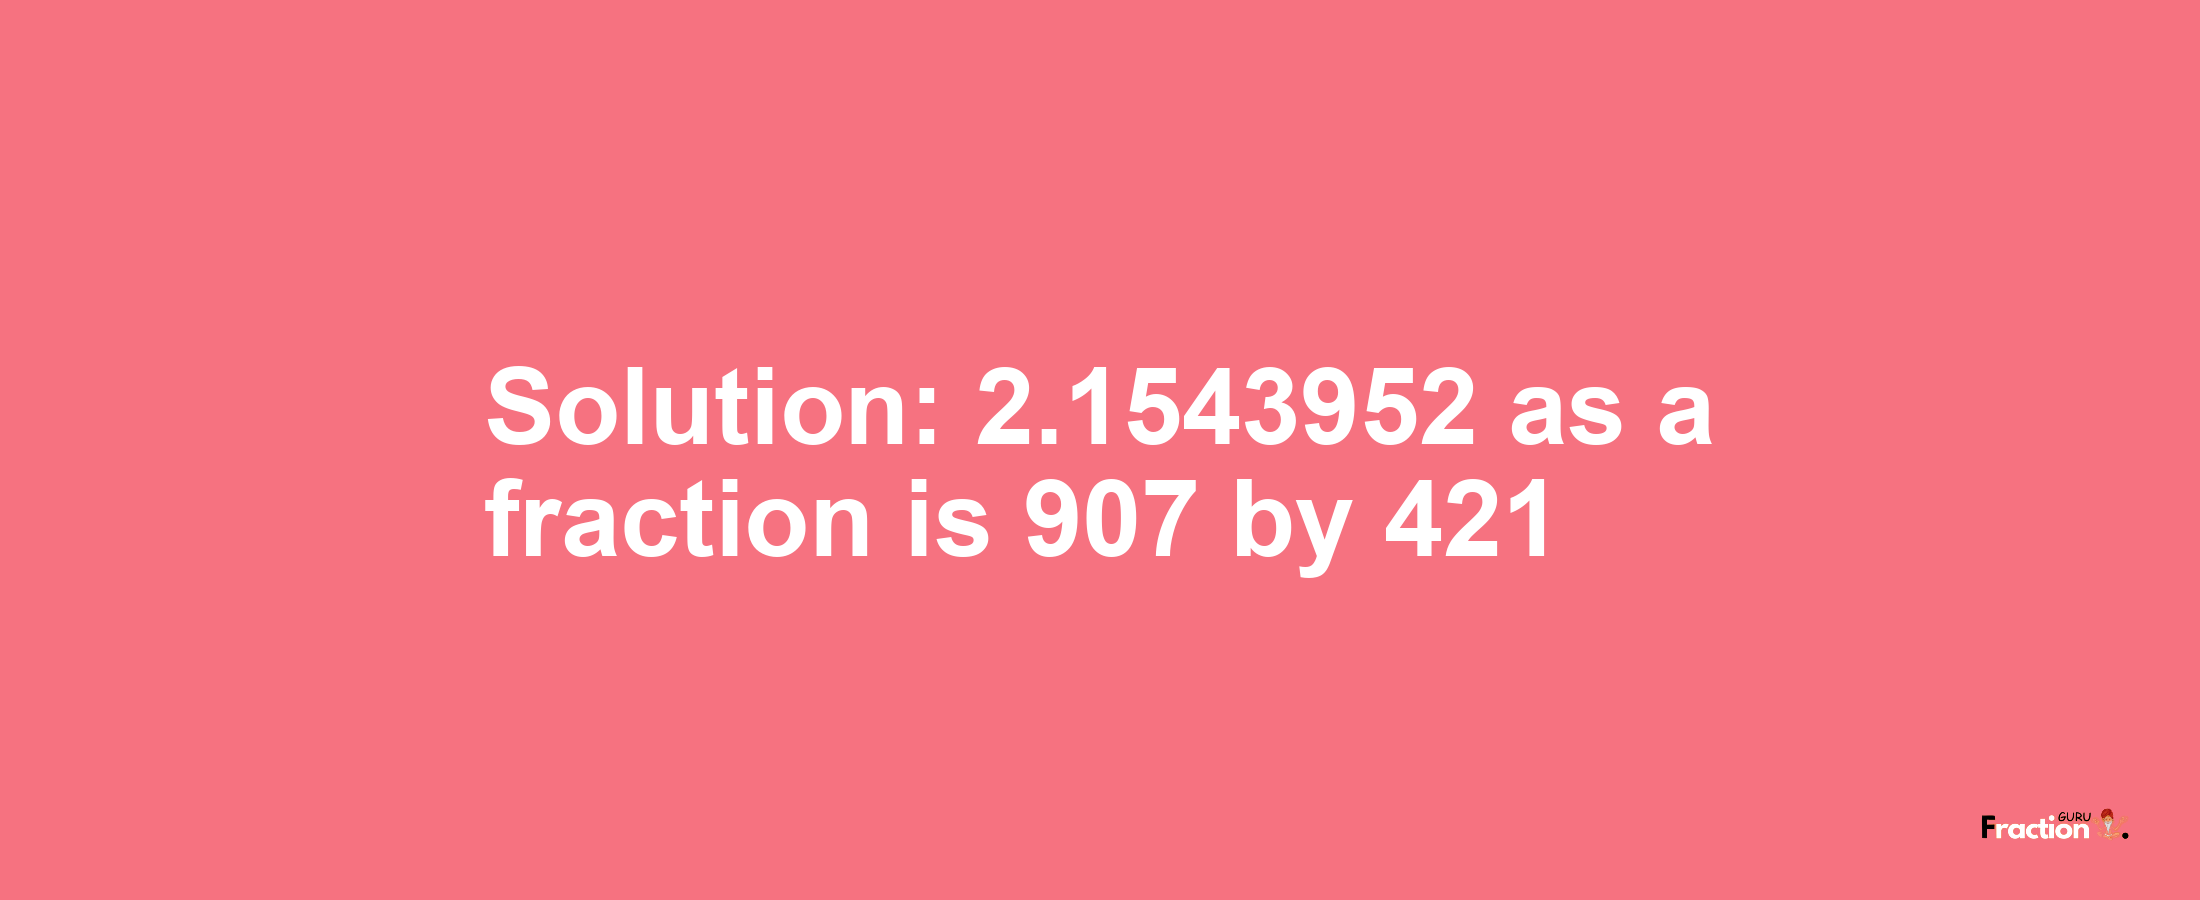 Solution:2.1543952 as a fraction is 907/421